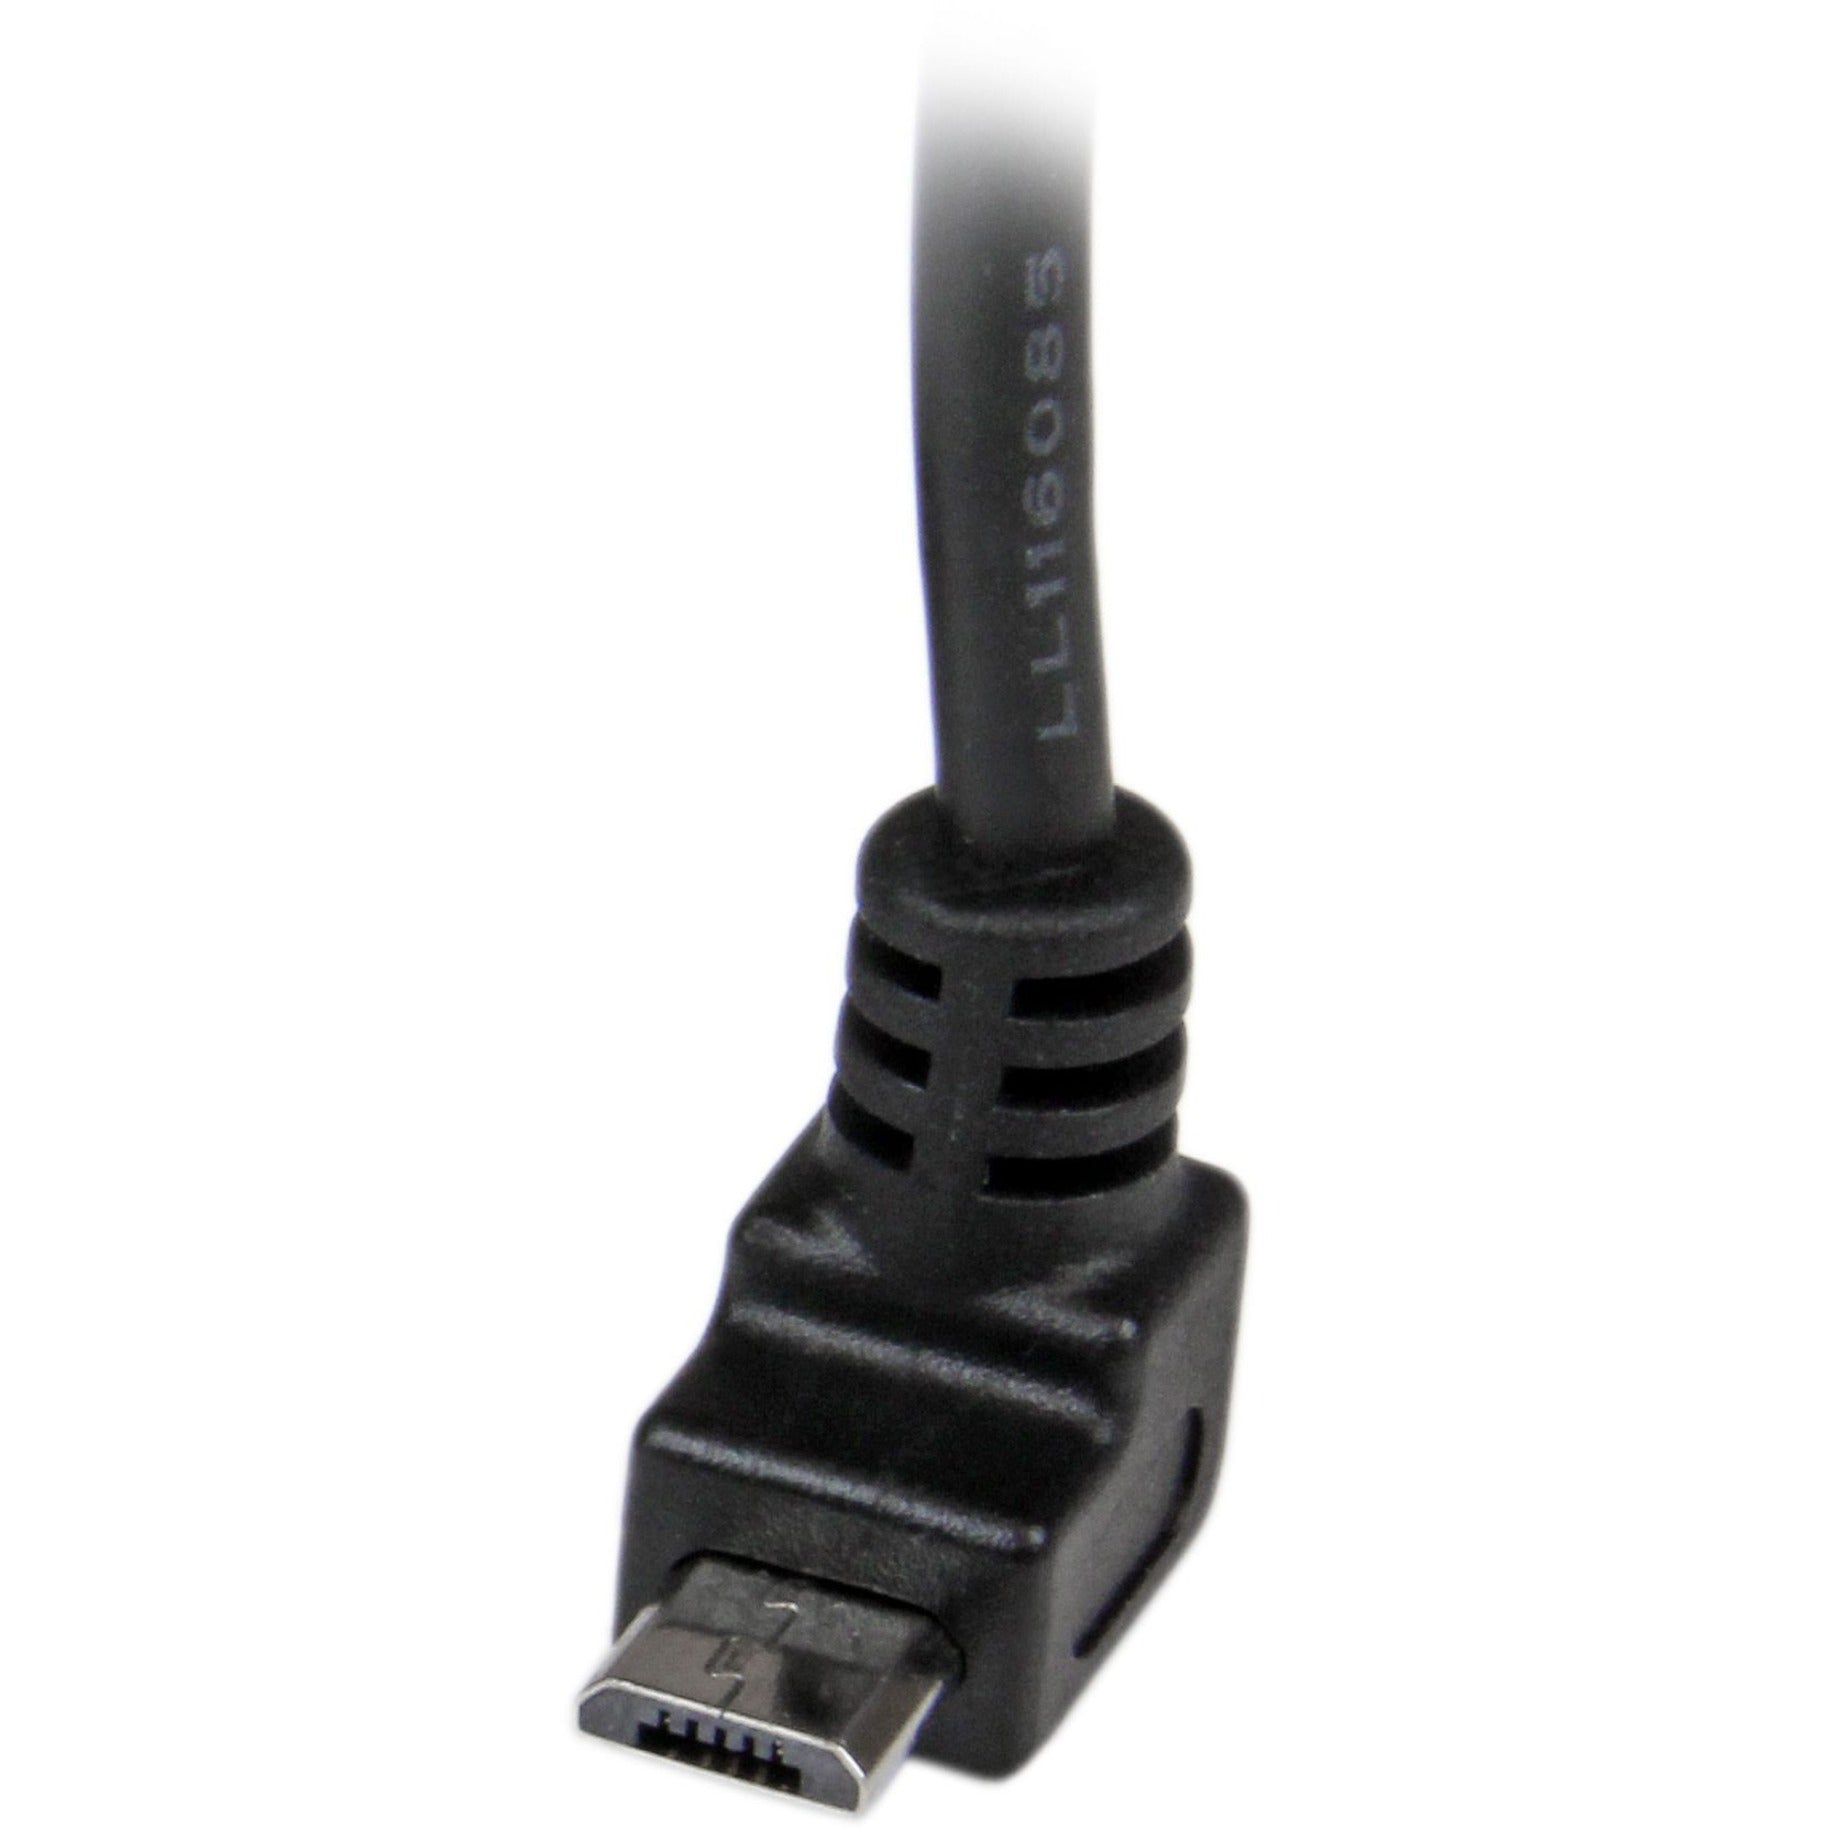 StarTech.com USBAUB2MU 2m Micro USB Cable - A to Up Angle Micro B, Fast Charging, Strain Relief, Black